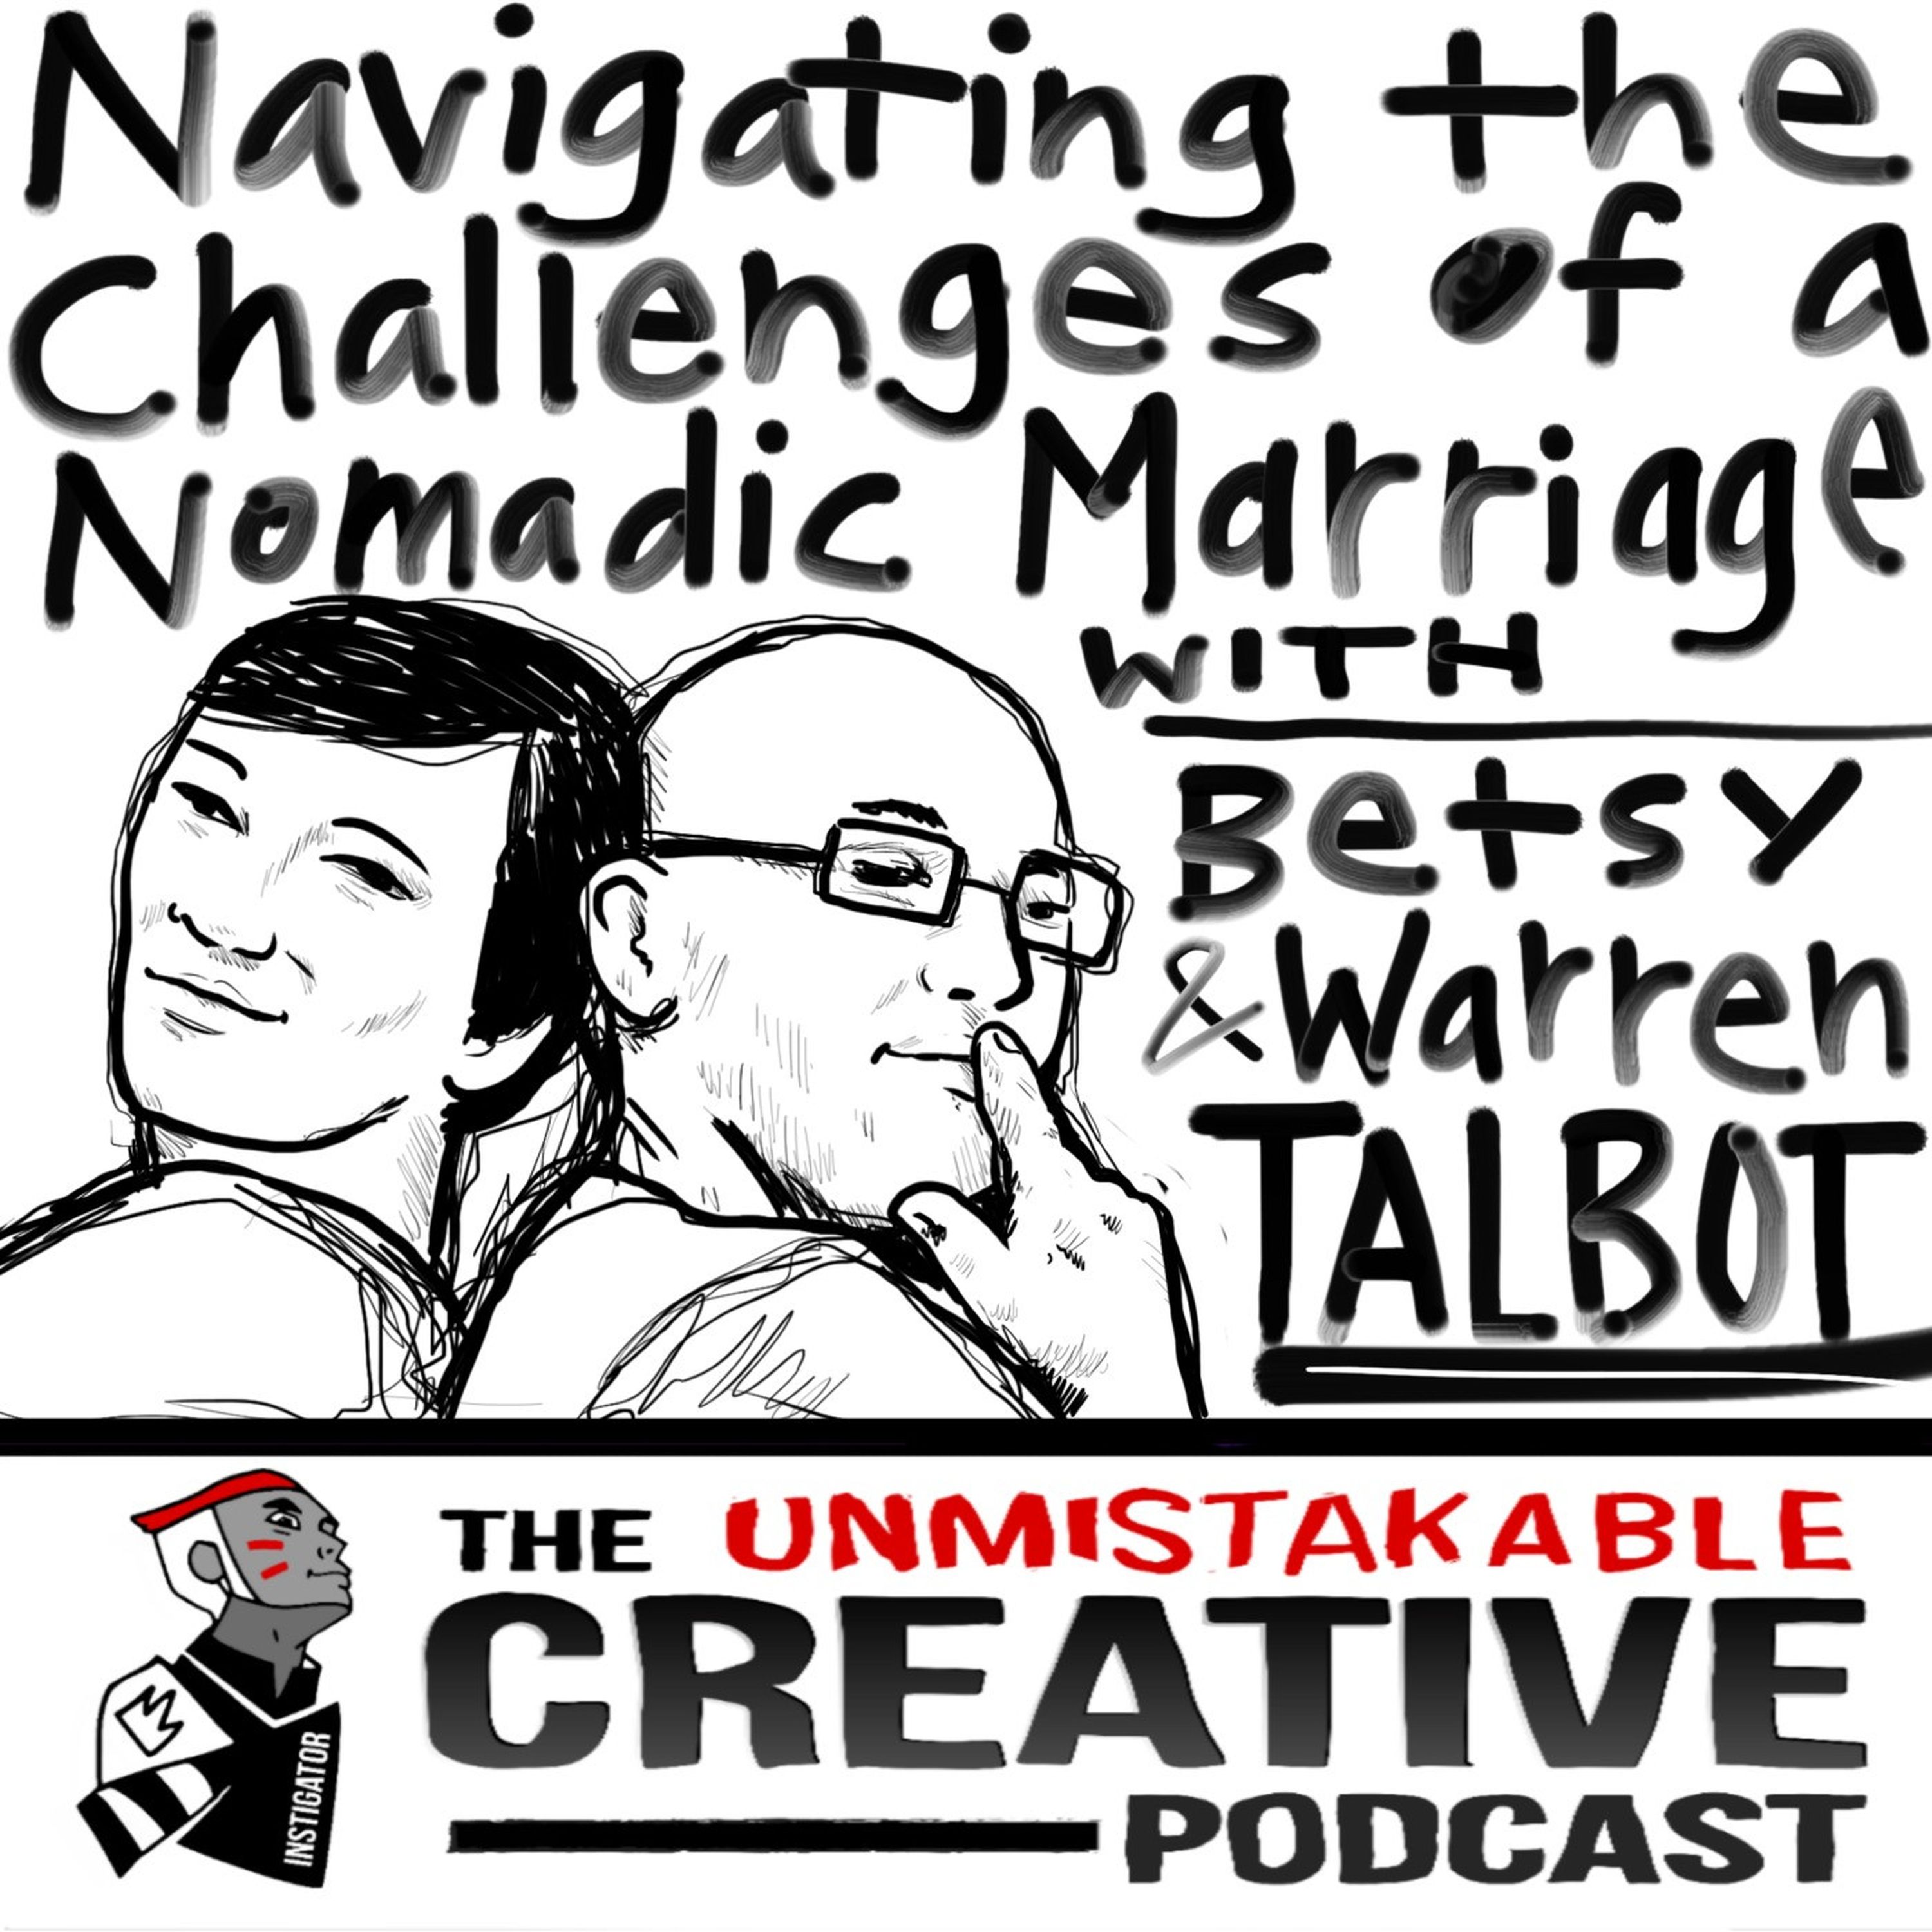 Navigating the Challenges of a Nomadic Marriage with Betsy and Warren Talbot Image